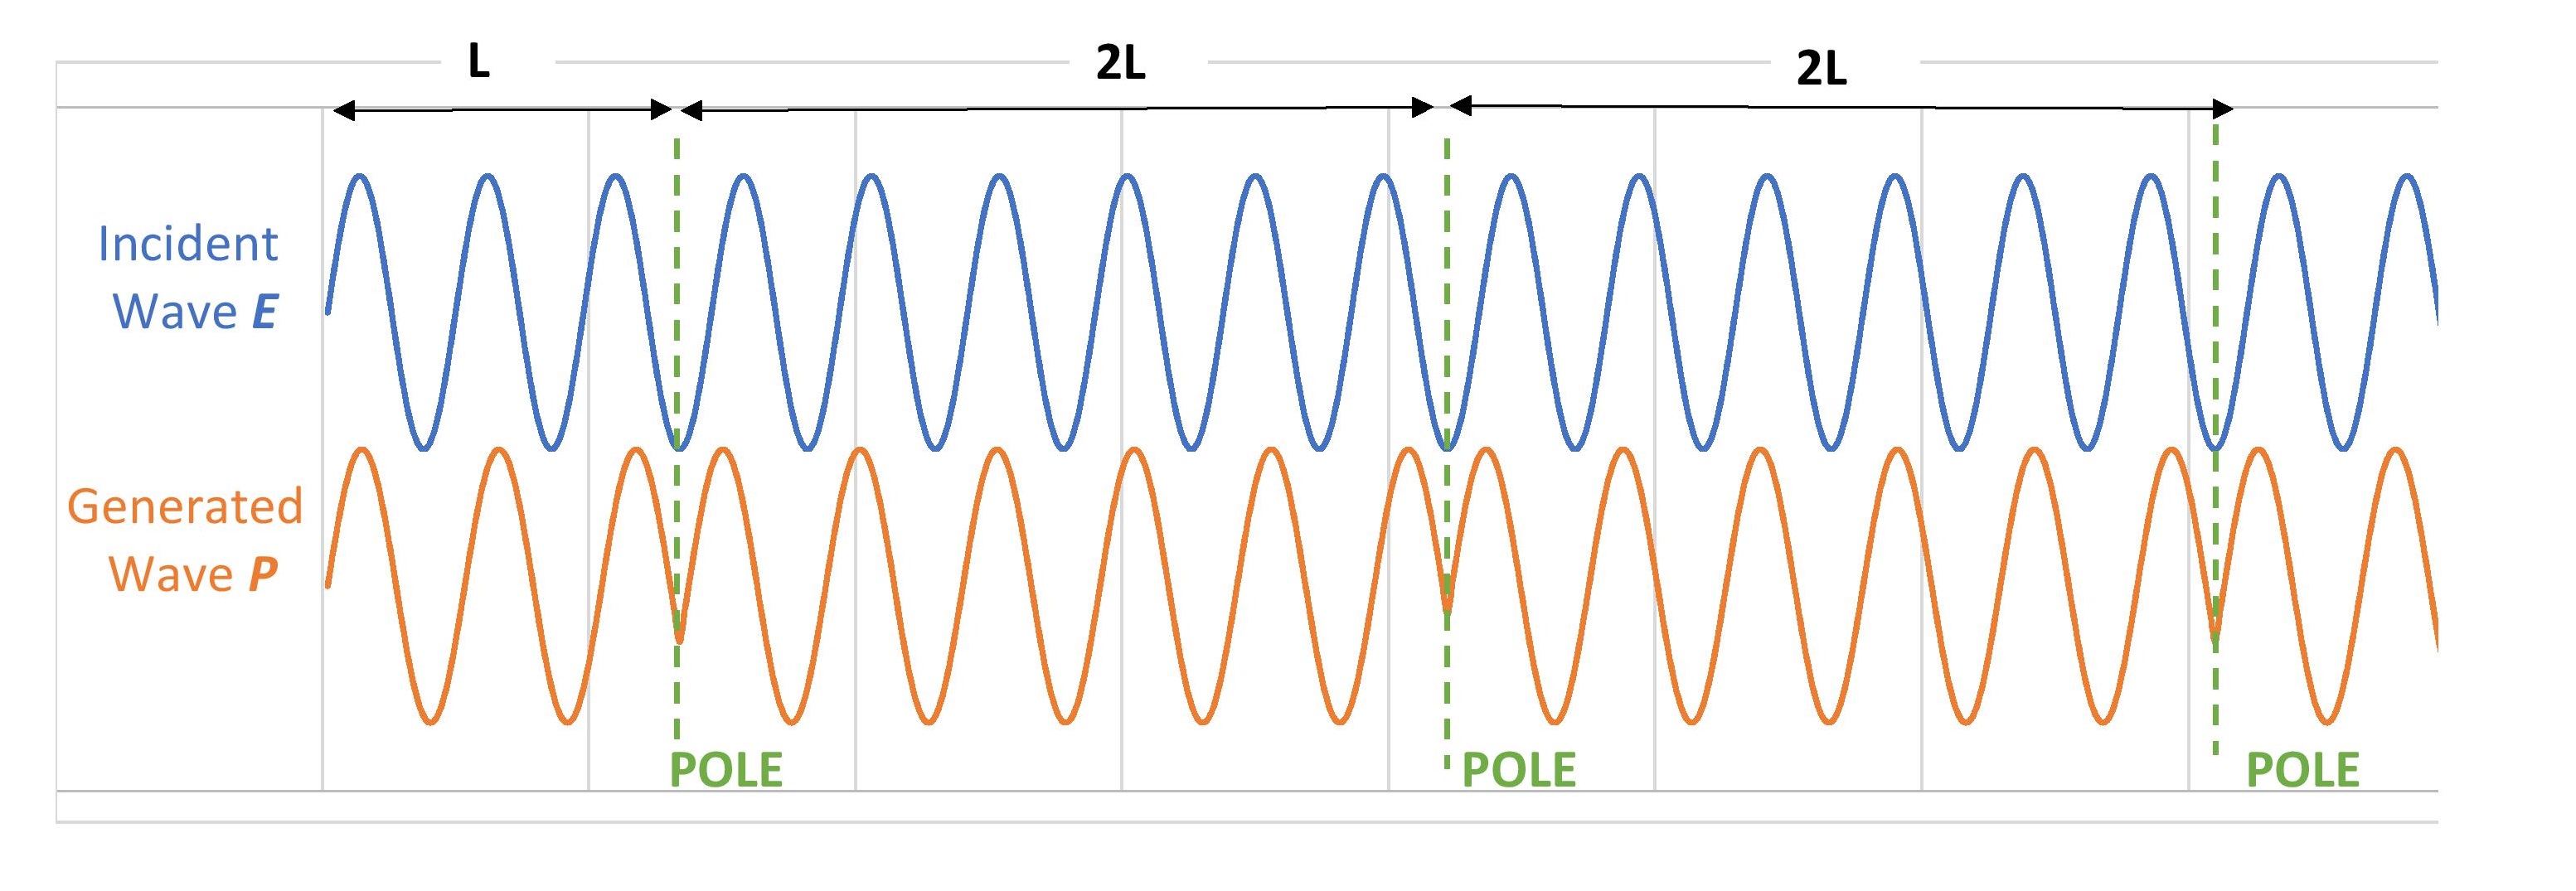 A conceptual illustration of the periodic poling on the generated wave